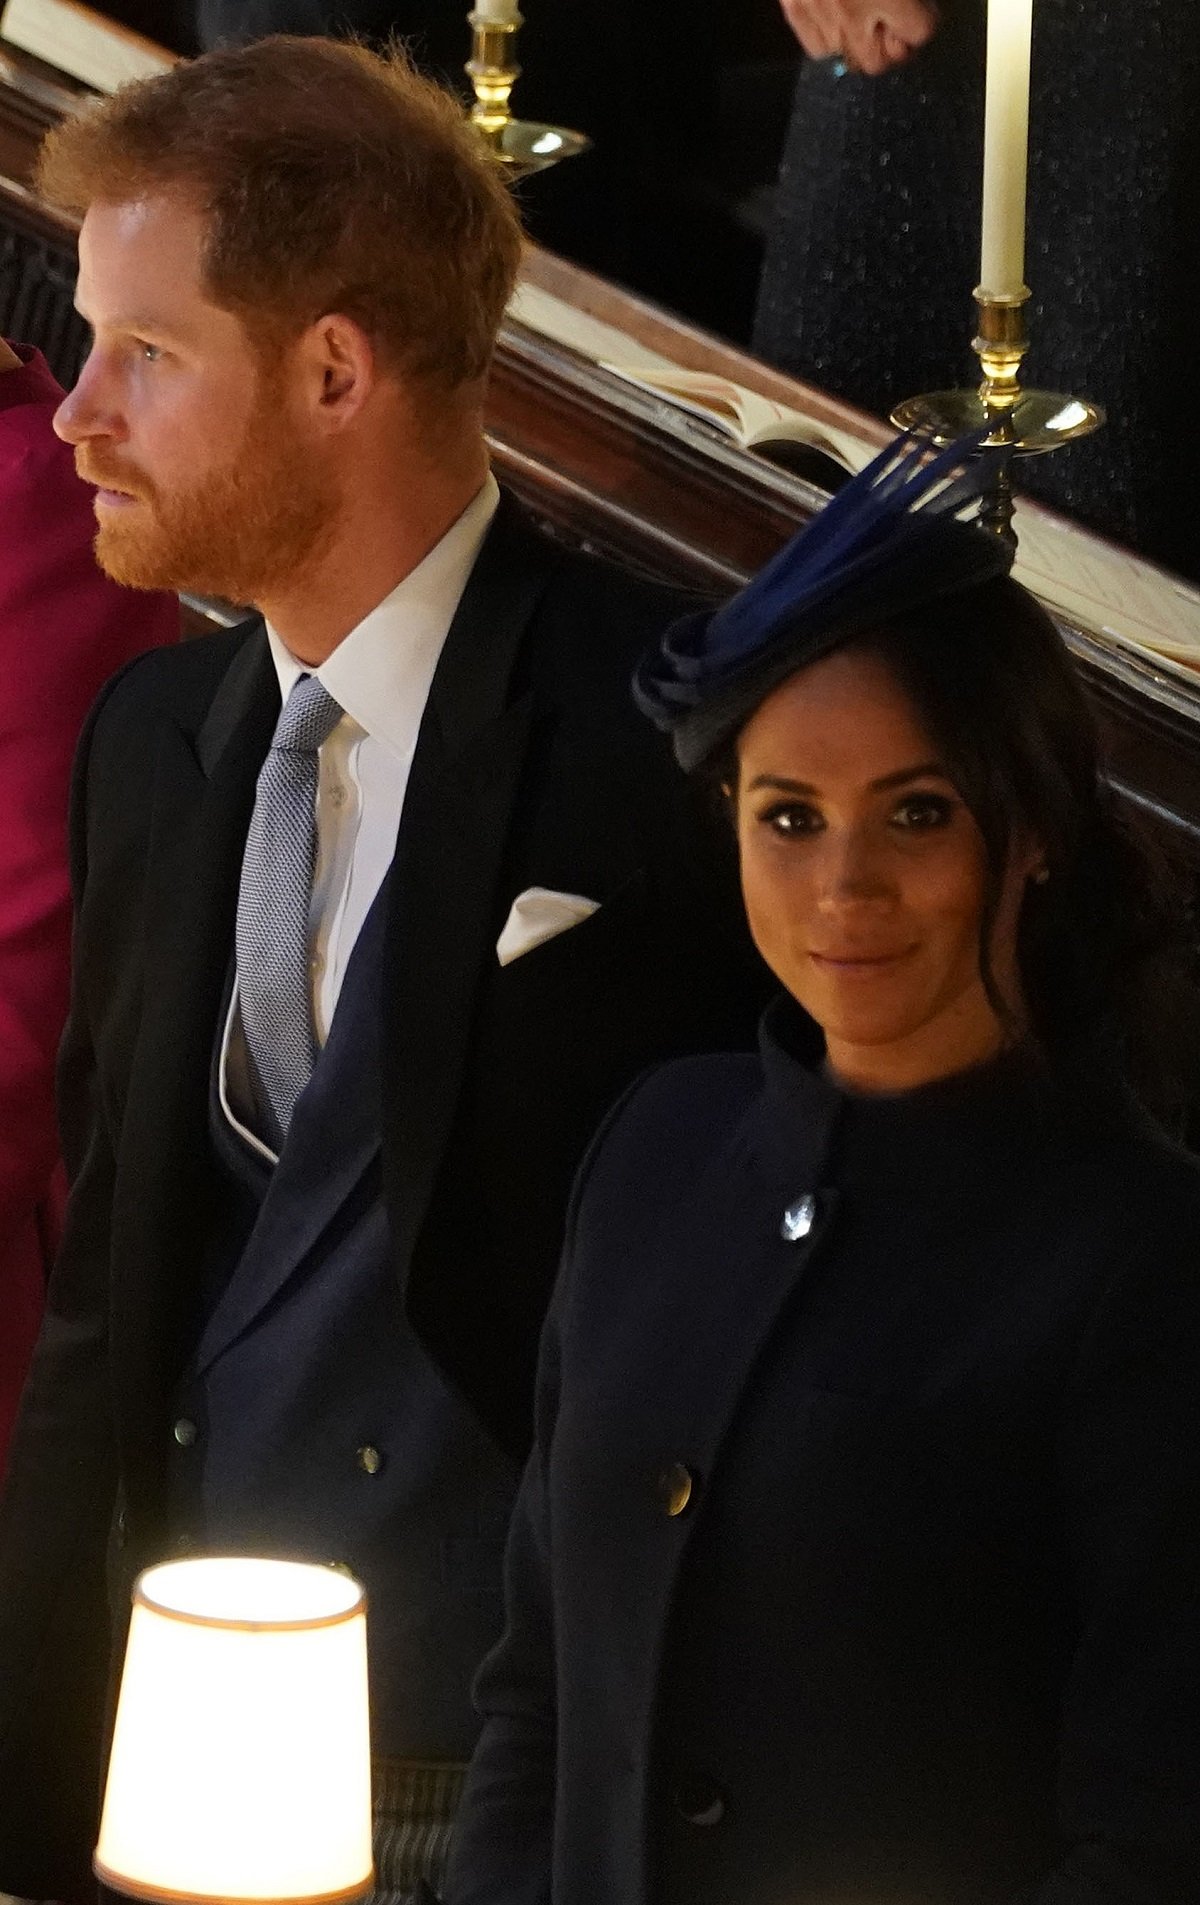 Prince Harry and Meghan Markle in attendance at Princess Eugenie's wedding